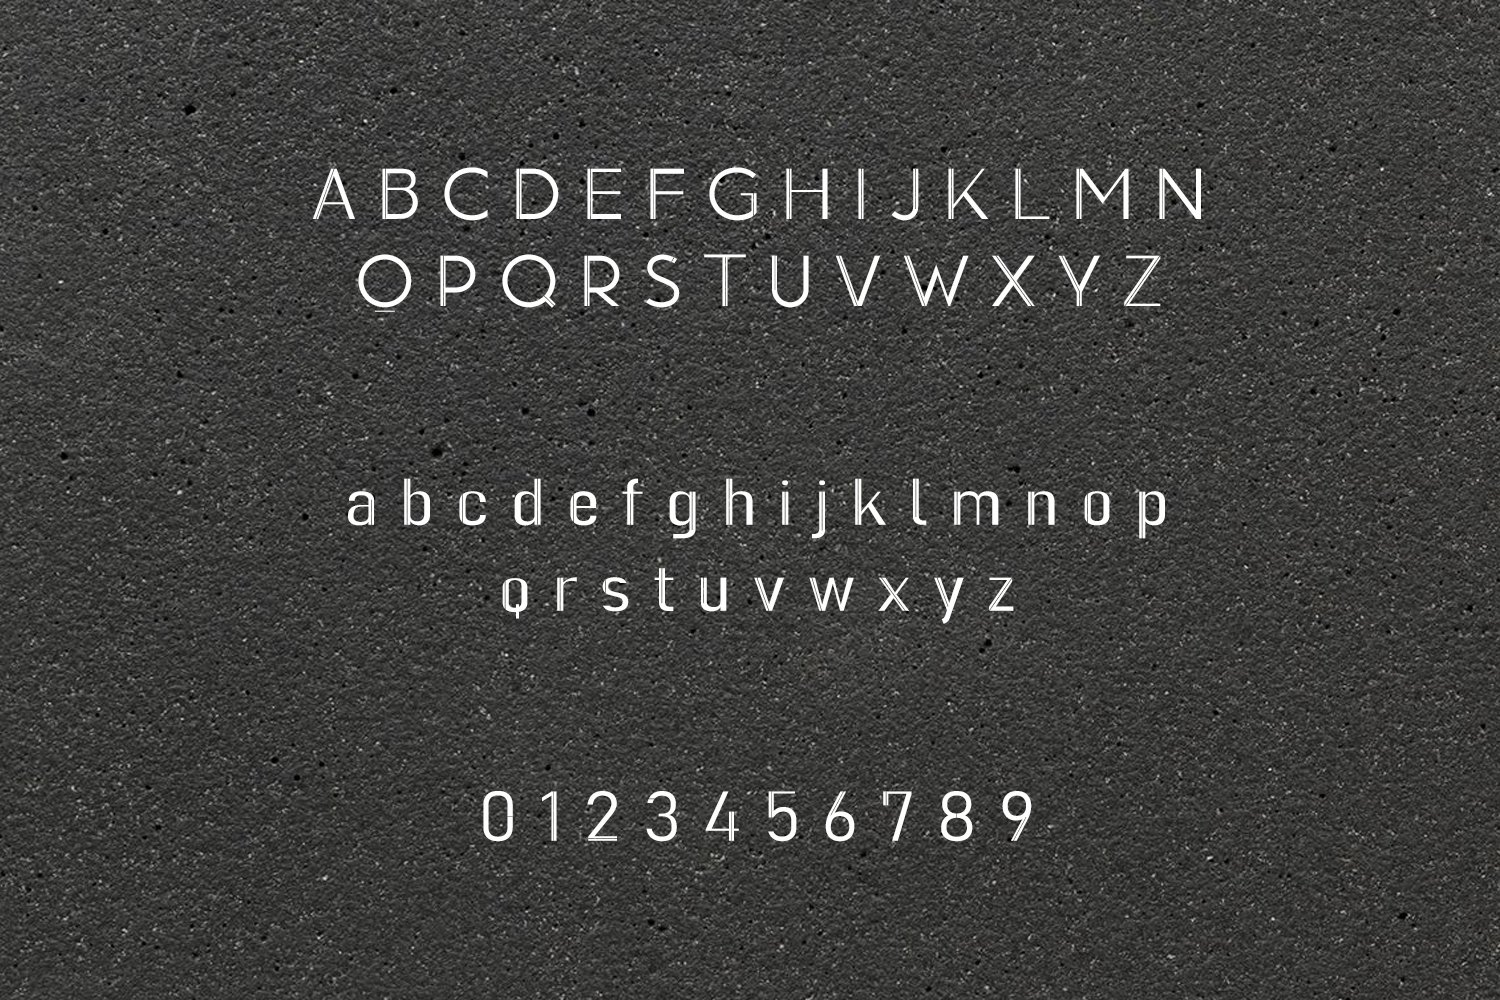 A black surface with white letters and numbers.